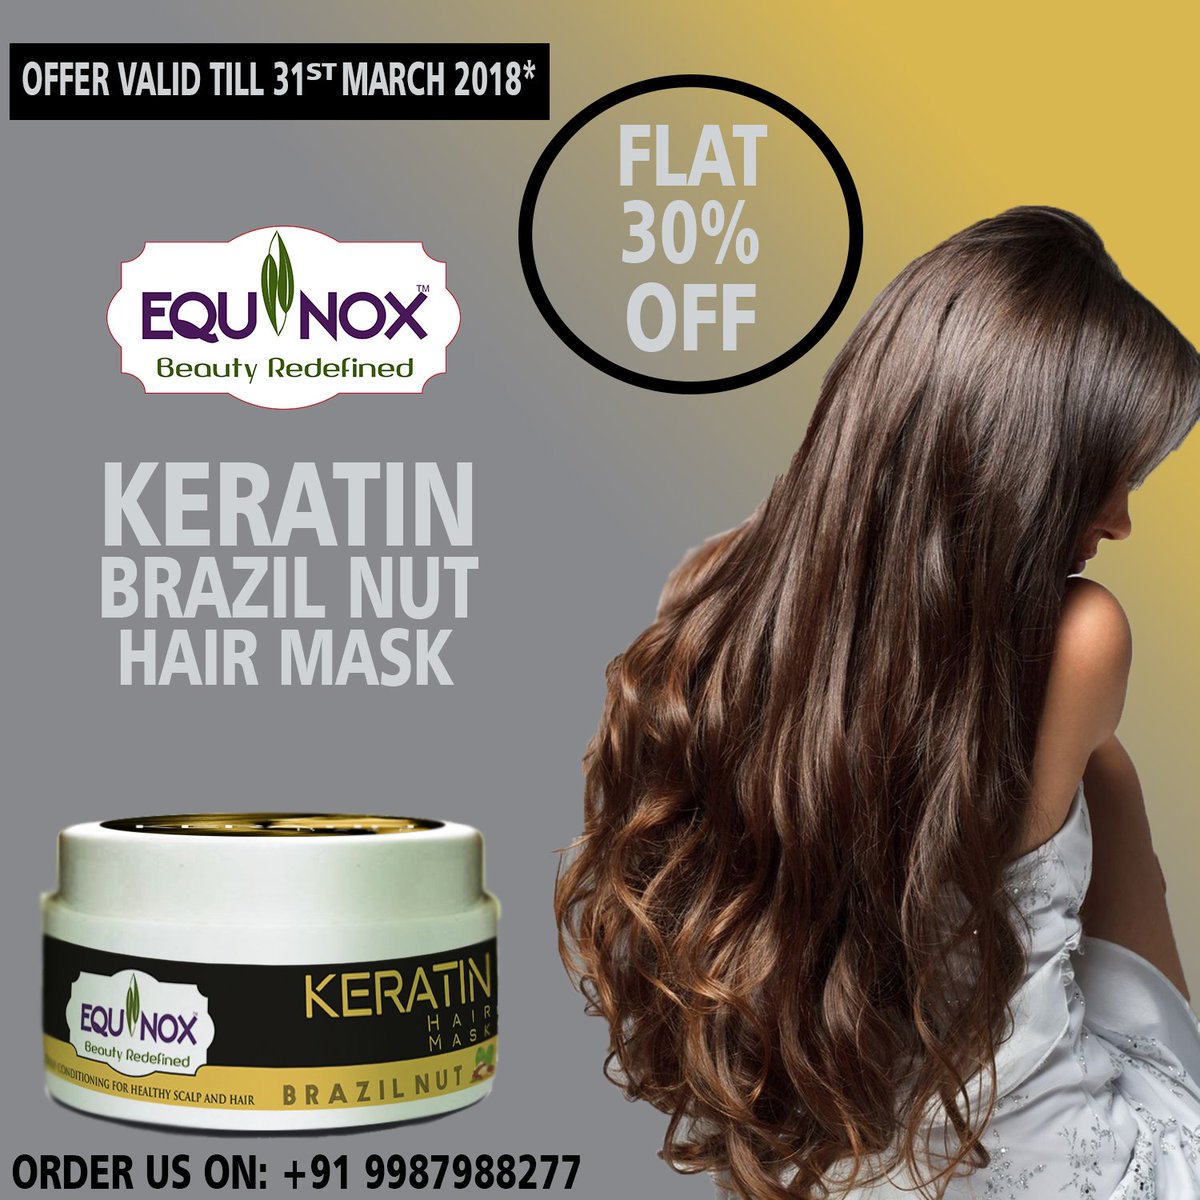 'Brazil nut contains all essential minerals, improves slow hair growth and adds Shine to your hair'
Those are the benefits you get when you use Keratin Brazil nut Hair Mask😁
Hurry and Grab your 30% Off.
Variant Available: 'Keratin Lavender Hair Mask.'
#haircare #keratinhairmask